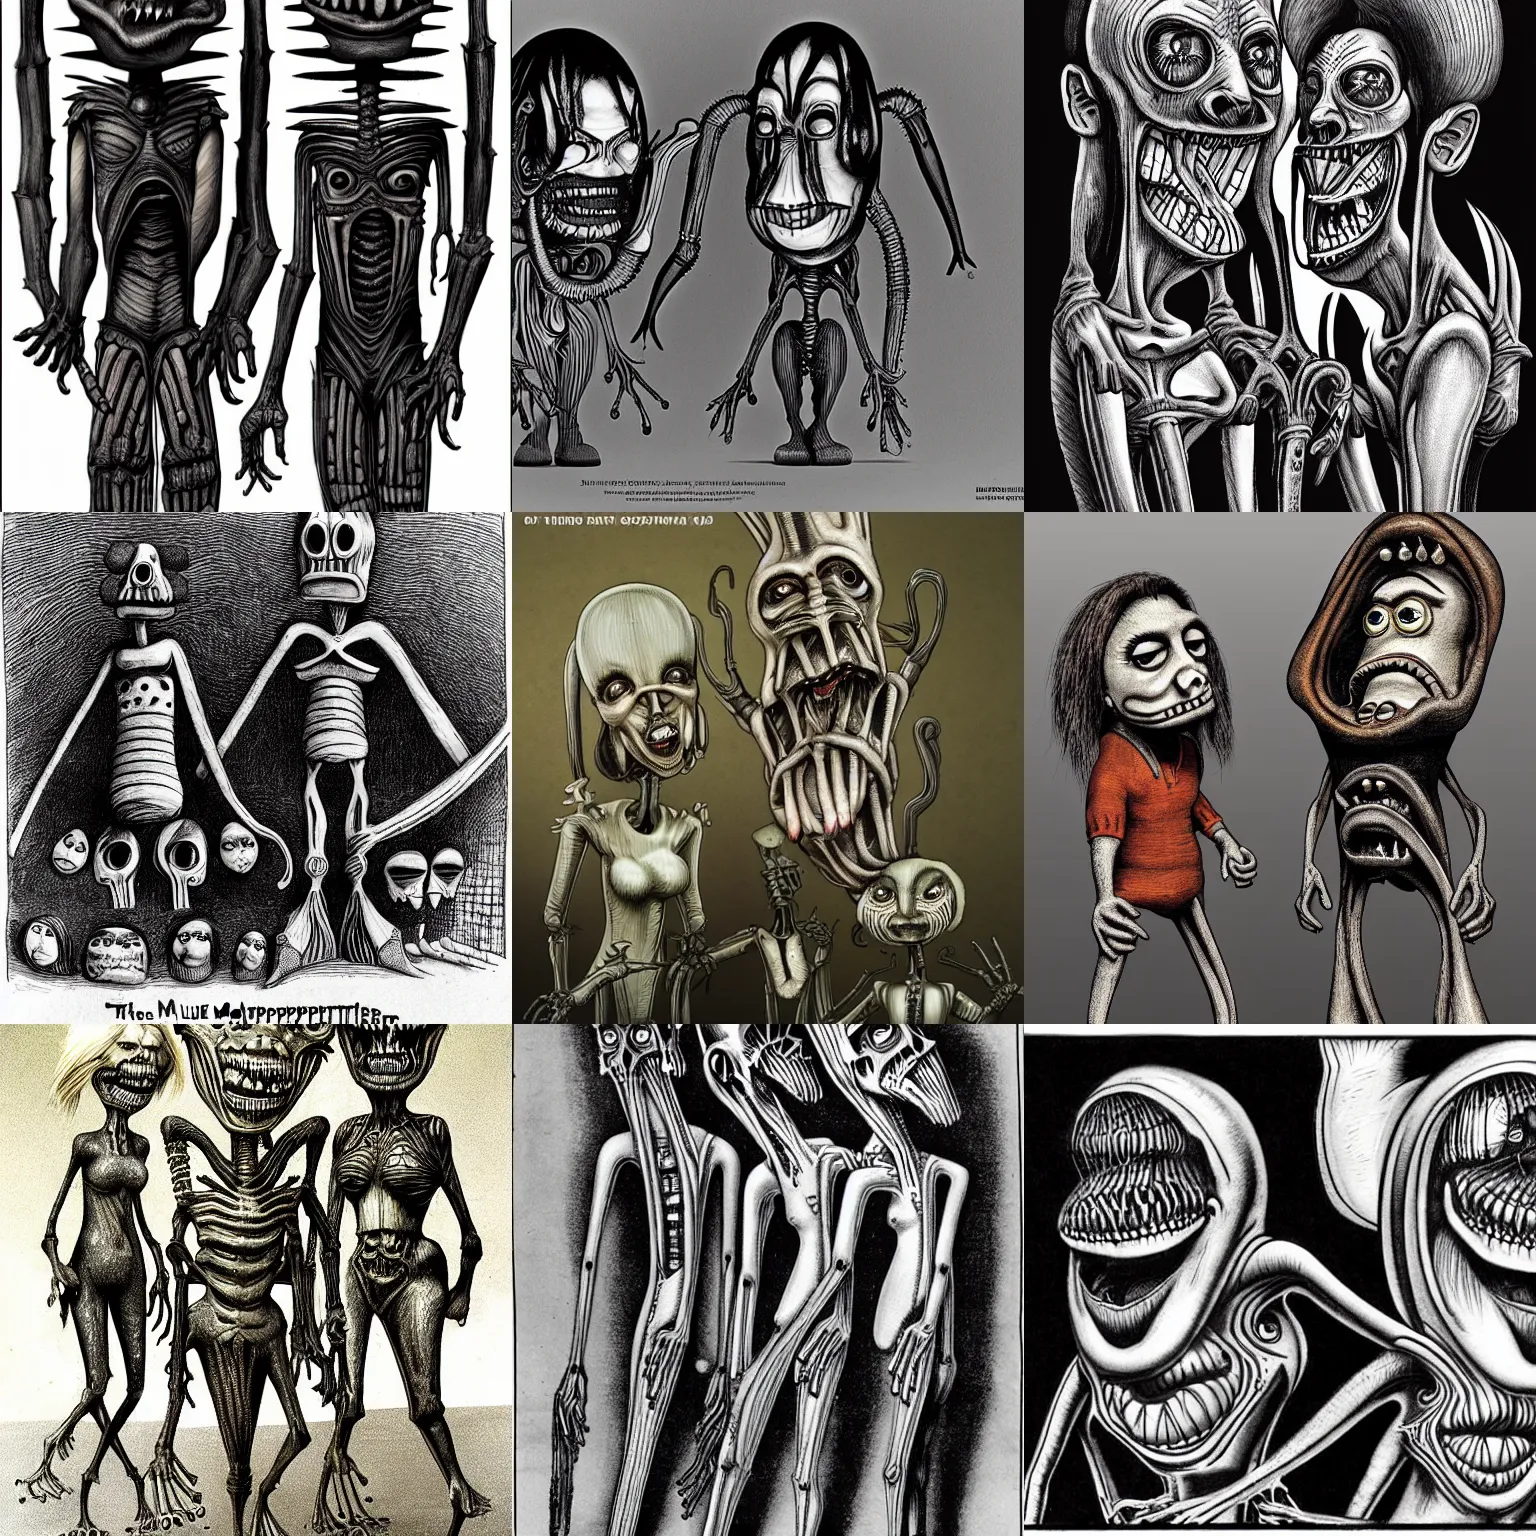 Prompt: the mupperts characters designed by h. r. giger